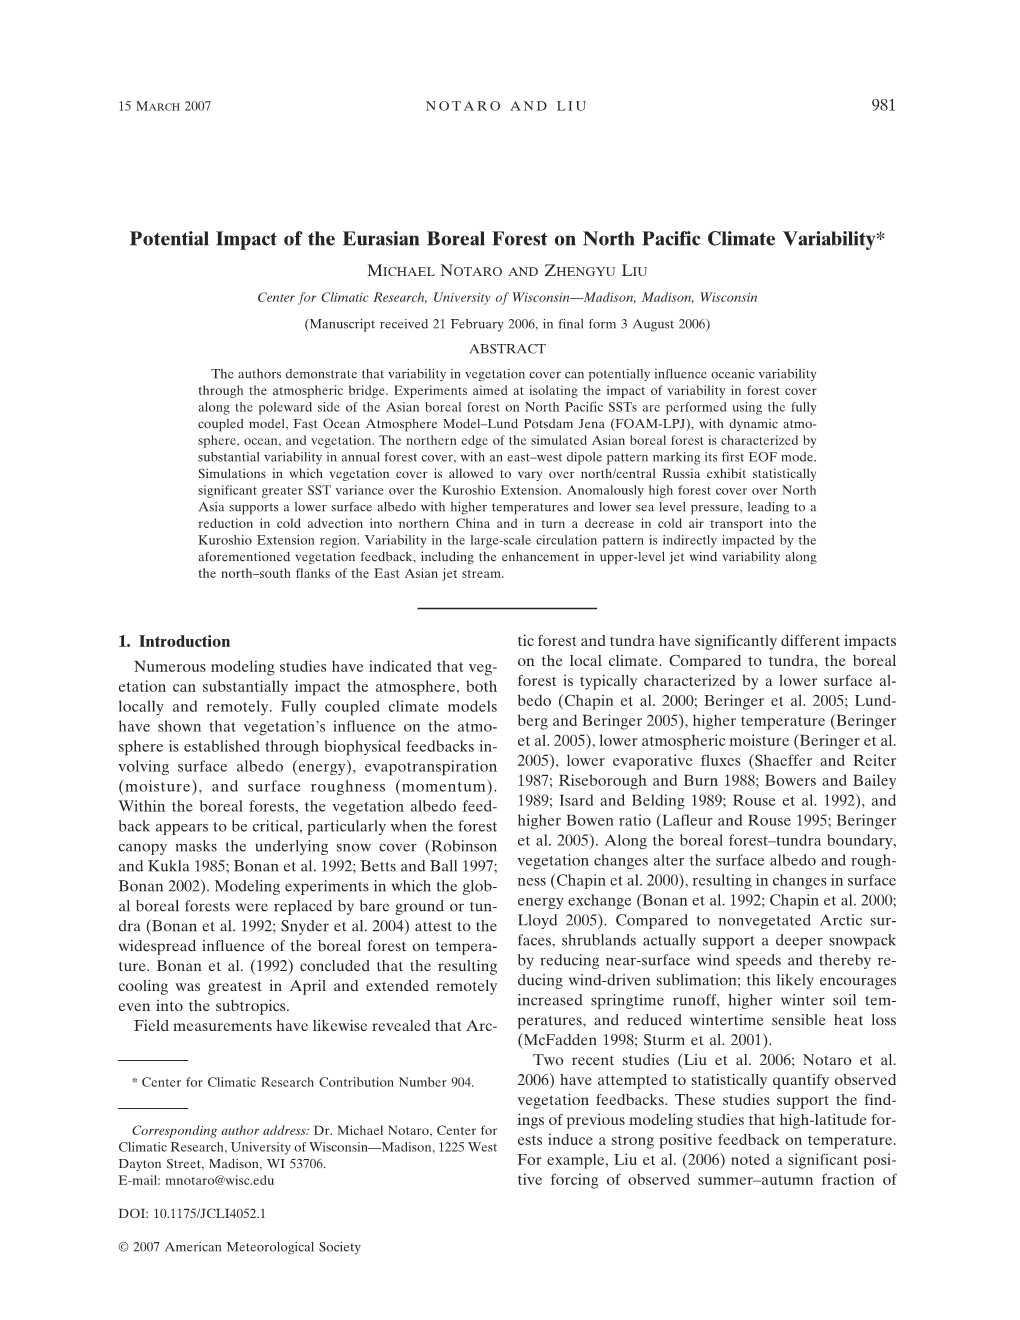 Potential Impact of Eurasian Boreal Forest on North Pacific Climate